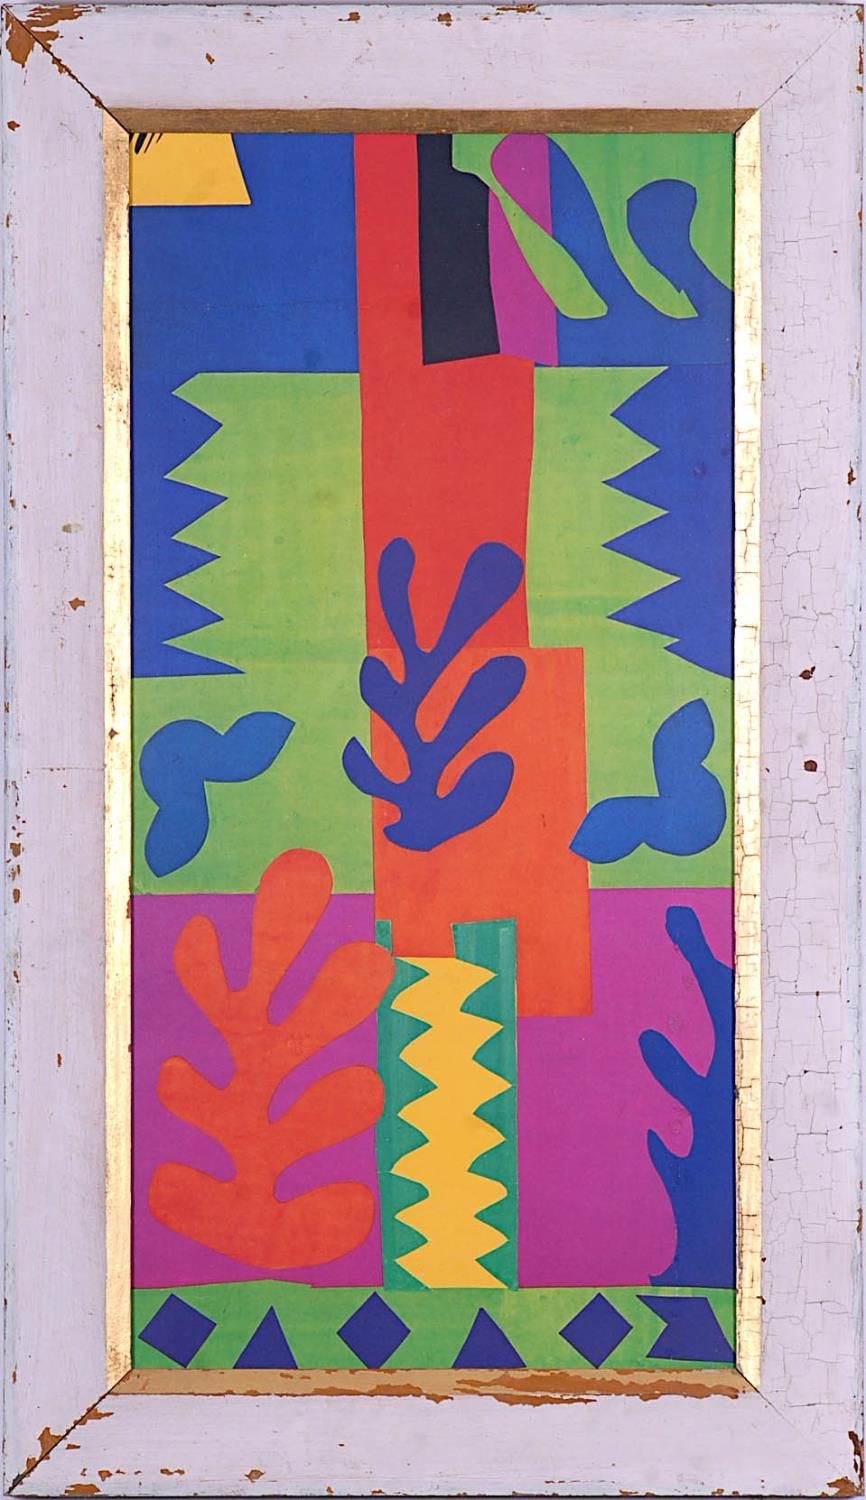 Matisse, The cut outs by Henri Matisse